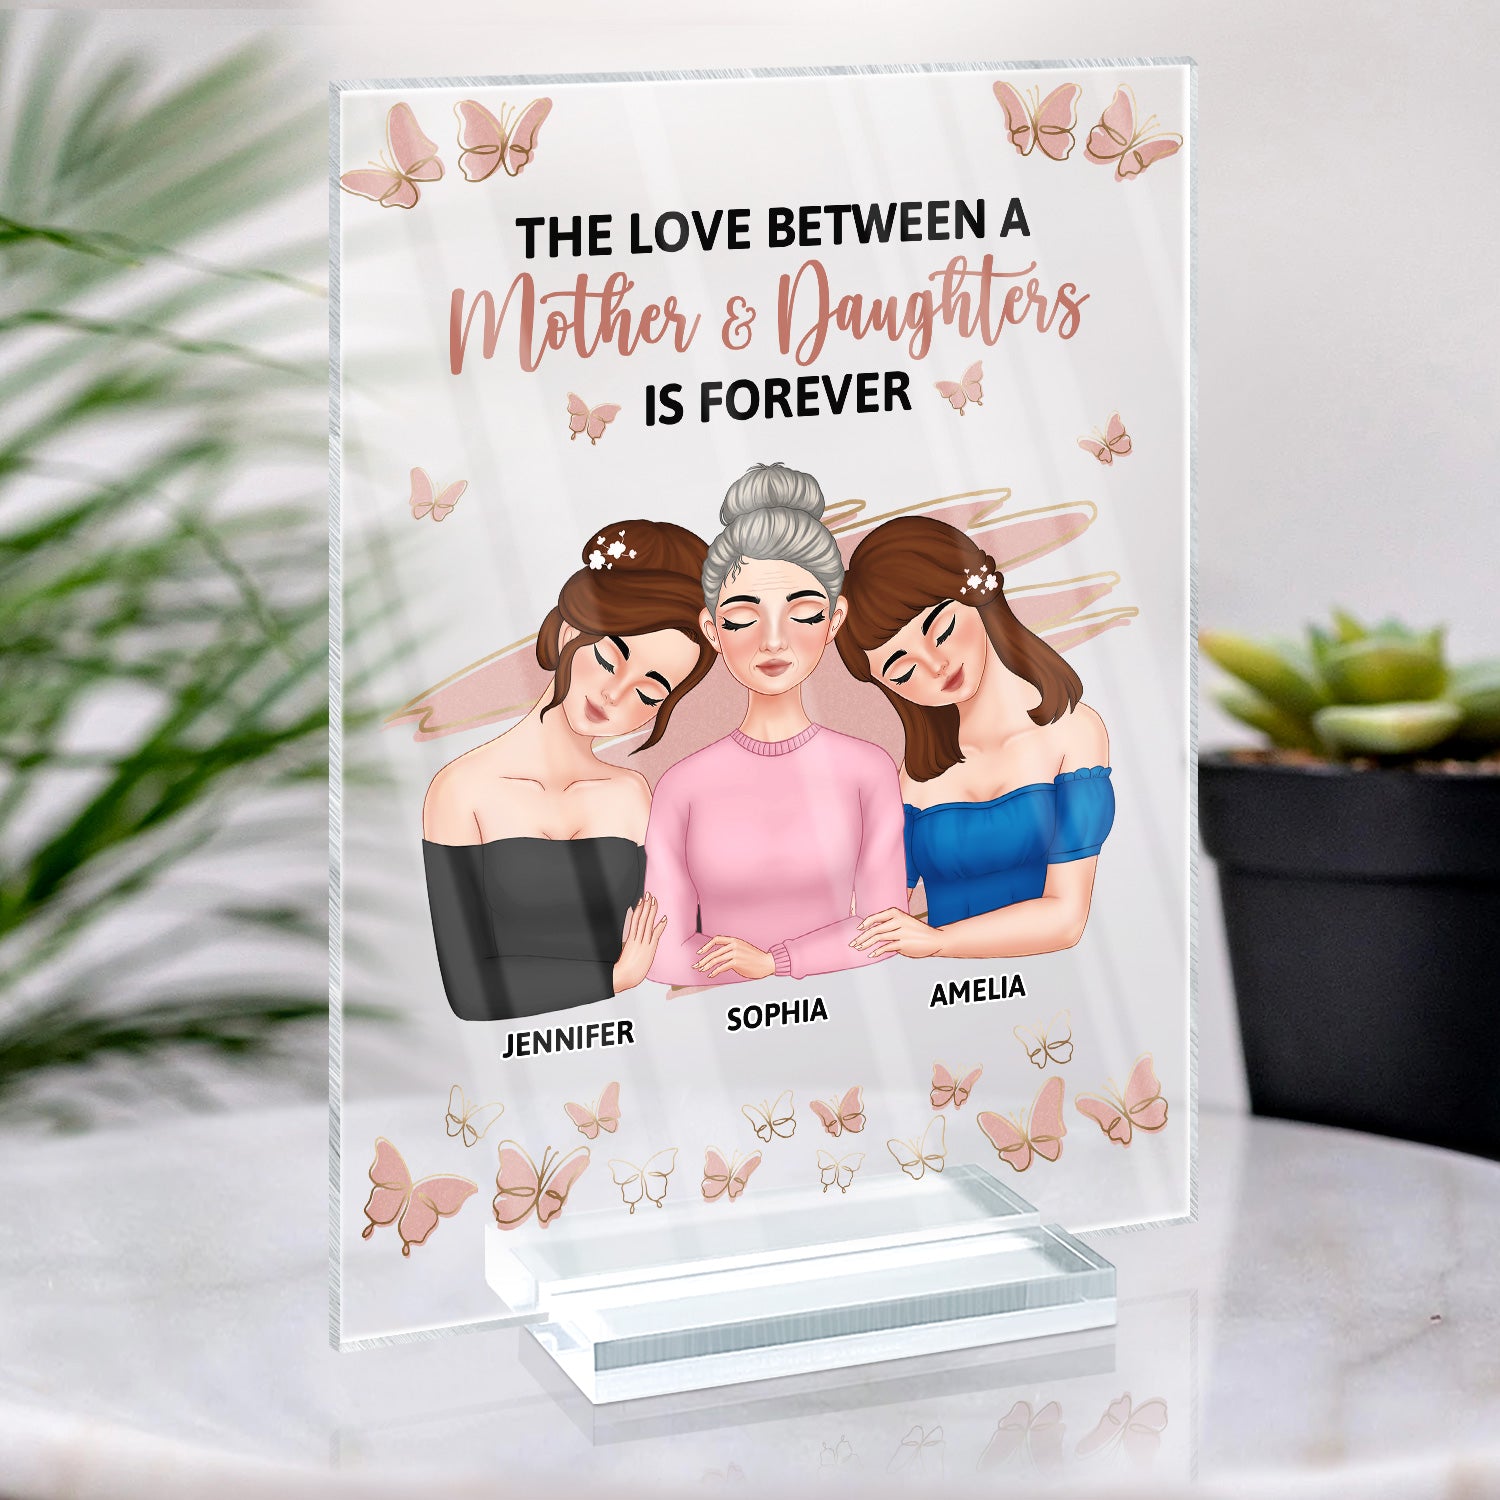 The Love Between A Mother & Daughters Is Forever - Gift For Mom - Personalized Vertical Rectangle Acrylic Plaque